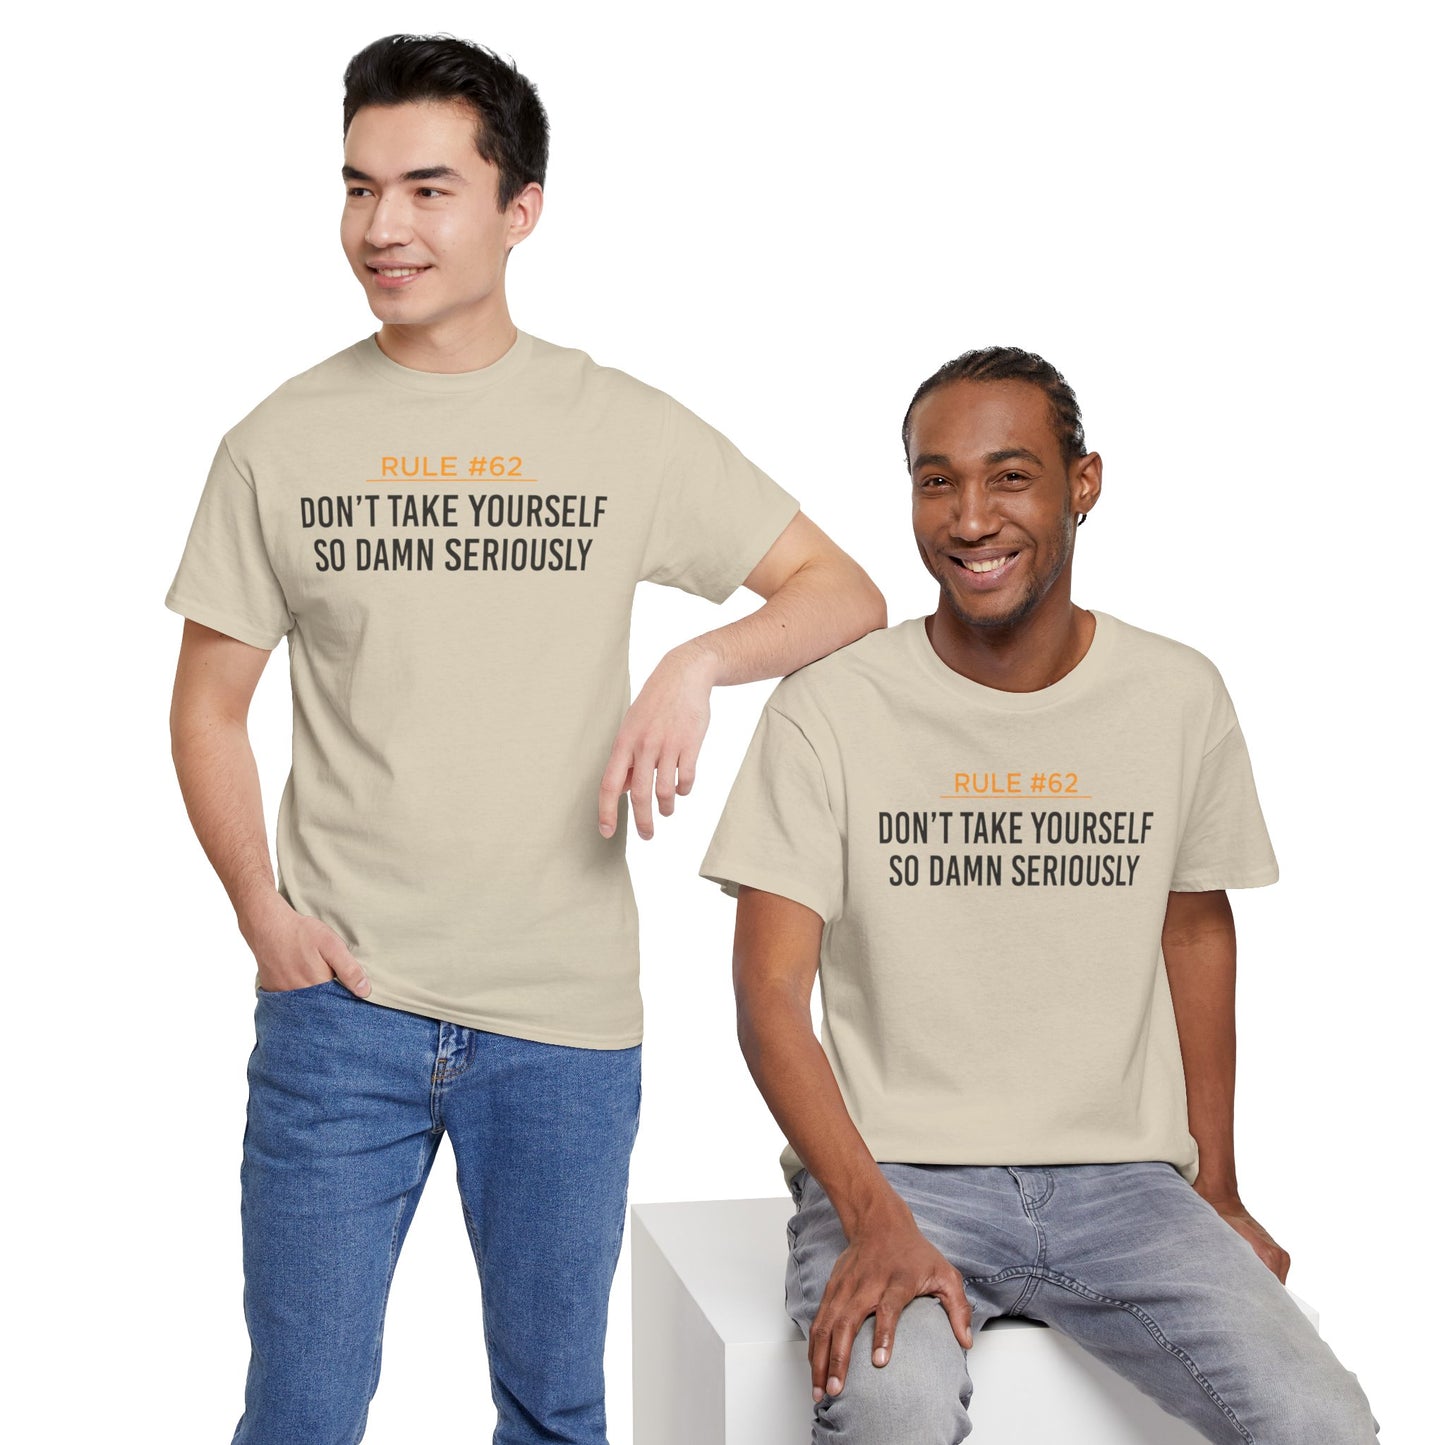 Don't Take Yourself So Serious Unisex Heavy Cotton Tee